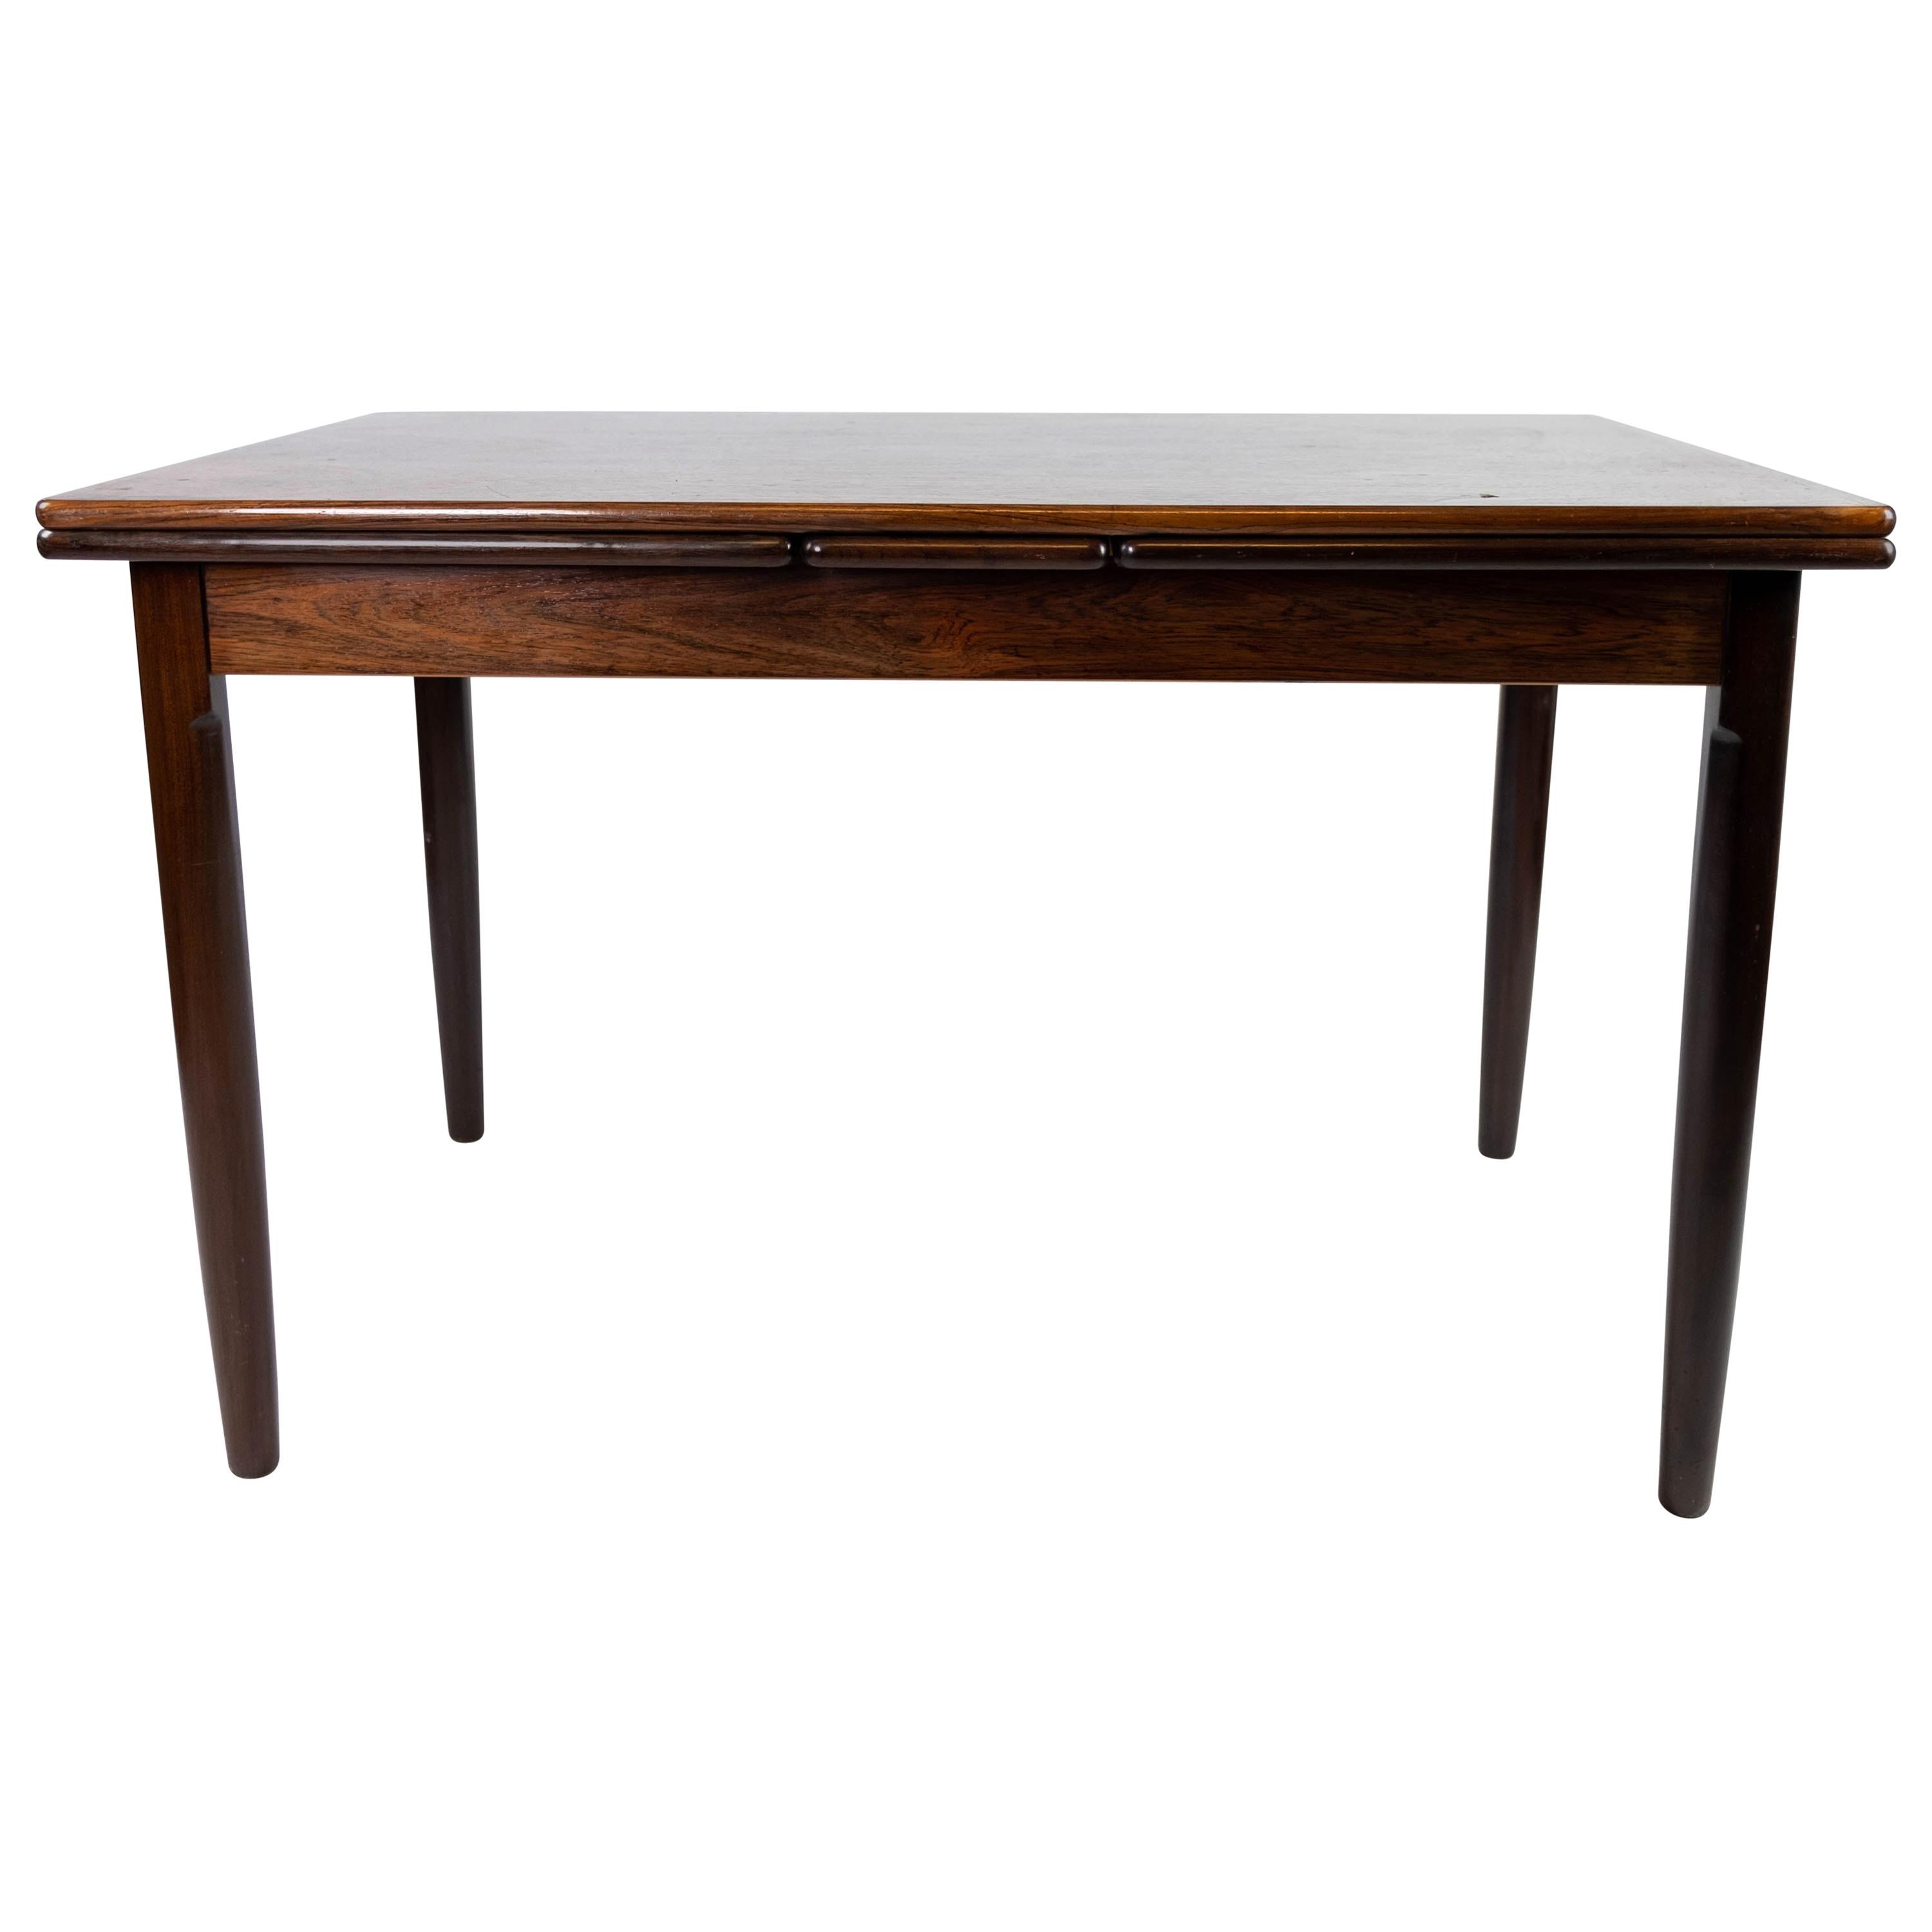 Dining Table in Rosewood with Extentions, of Danish Design from the, 1960s